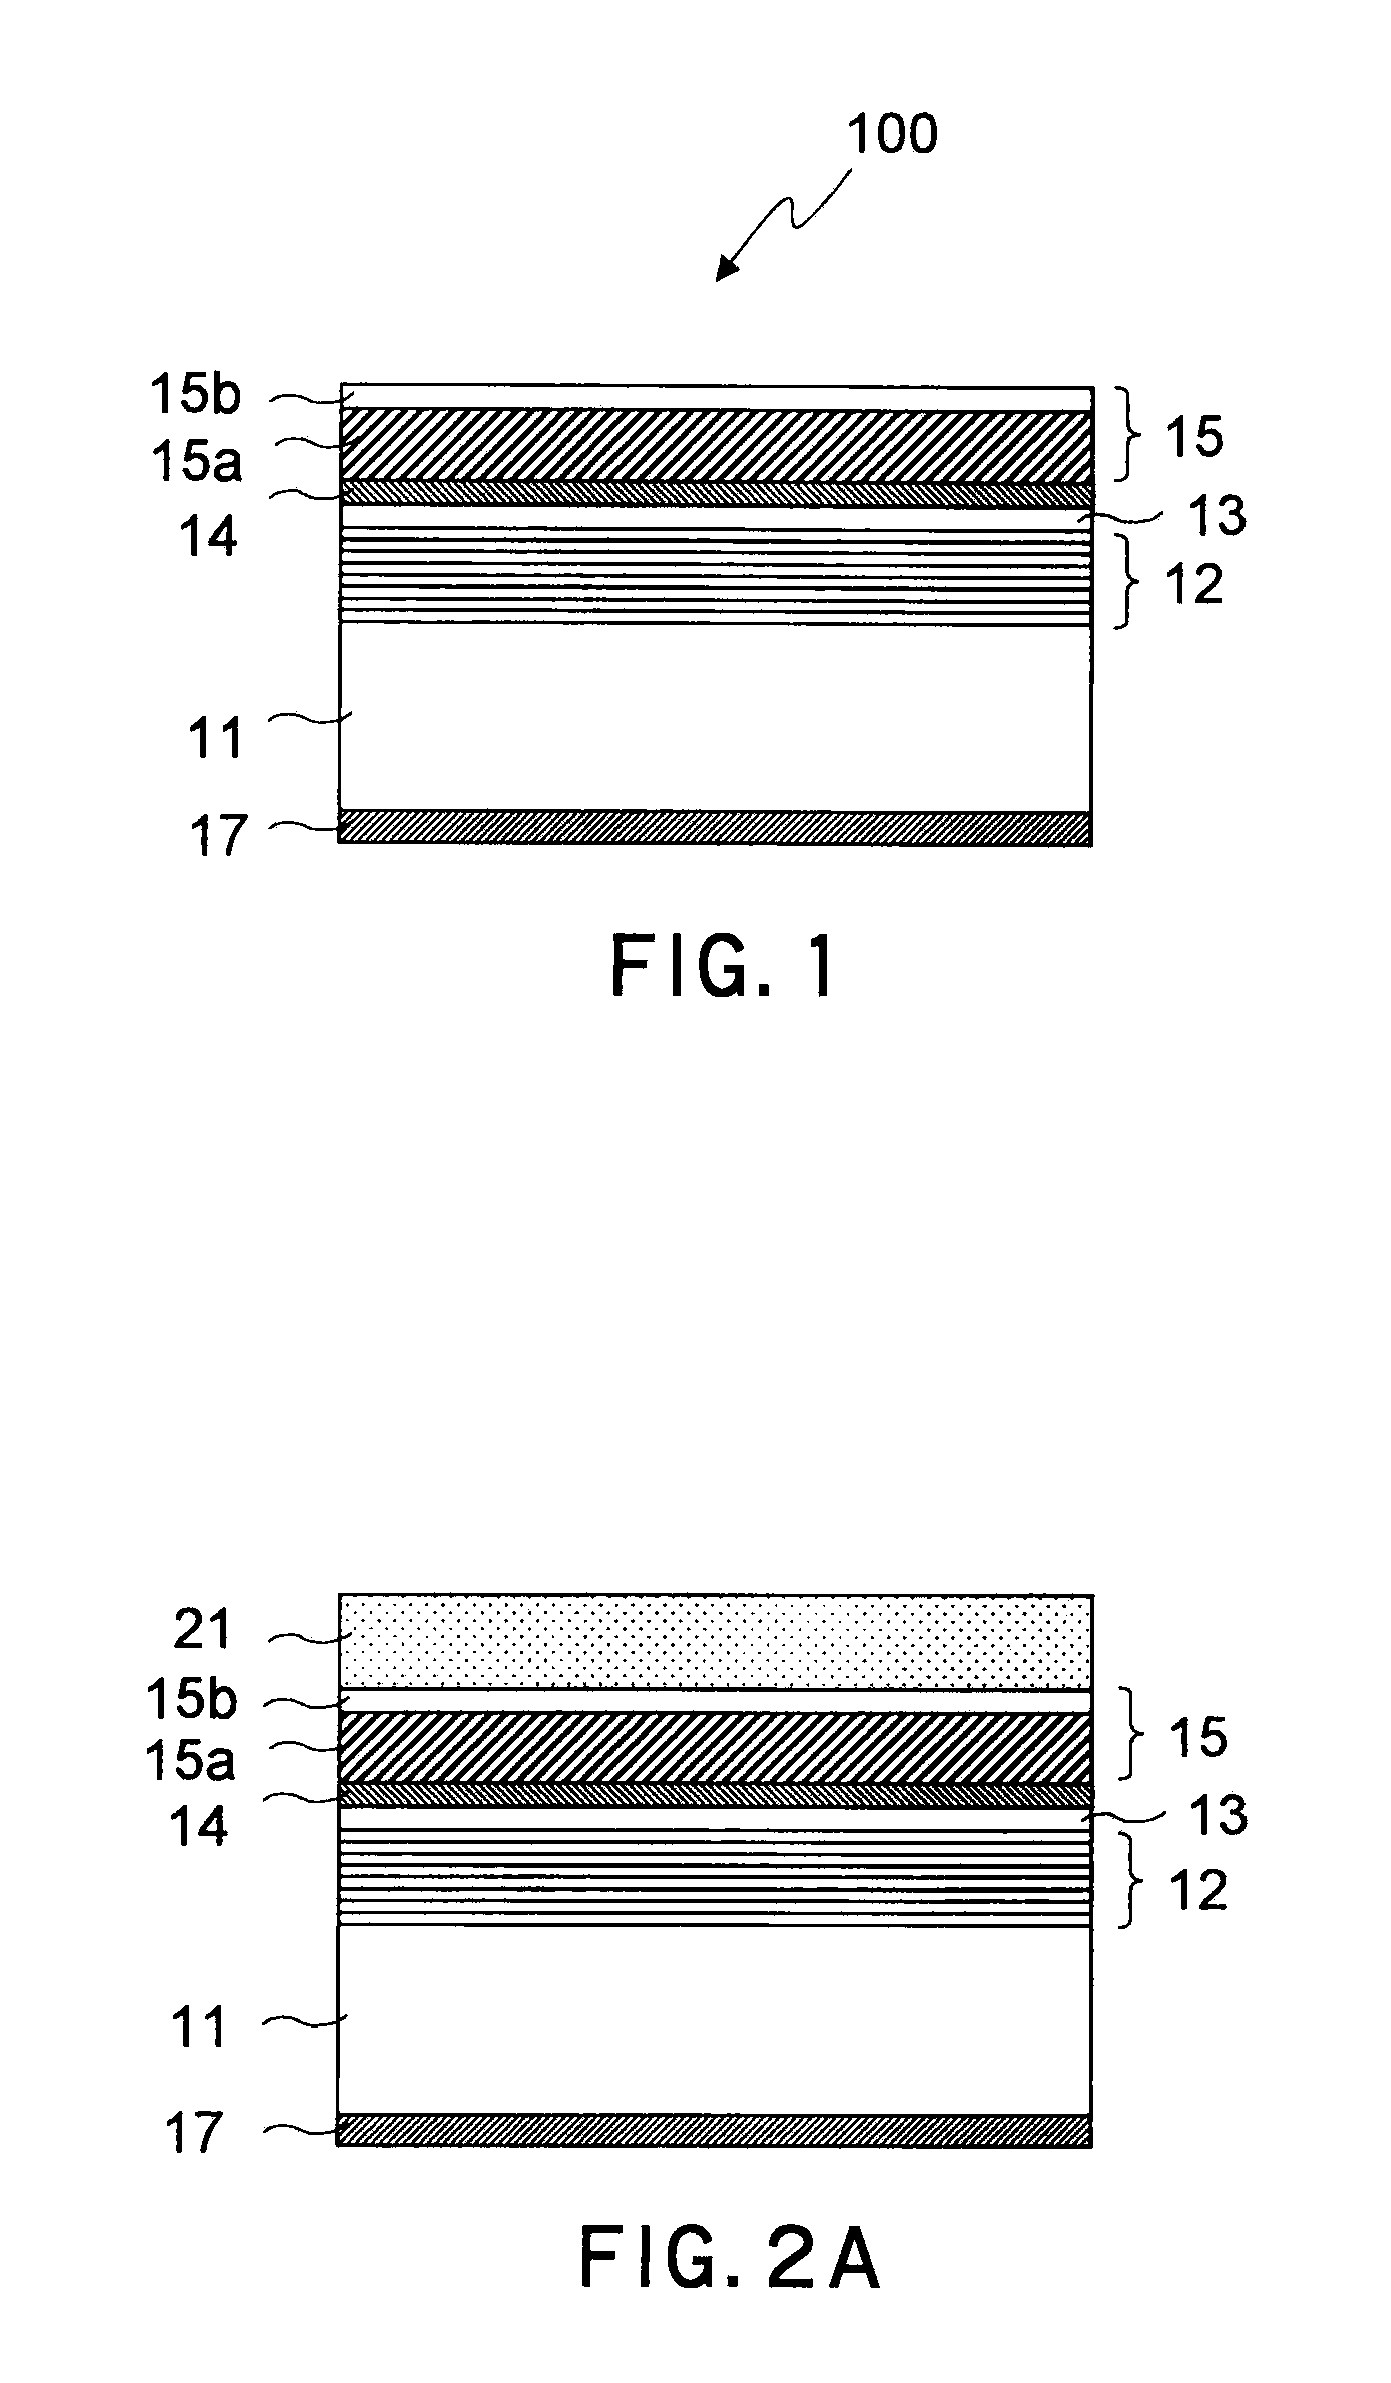 Reflection-type mask and method of making the reflection-type mask